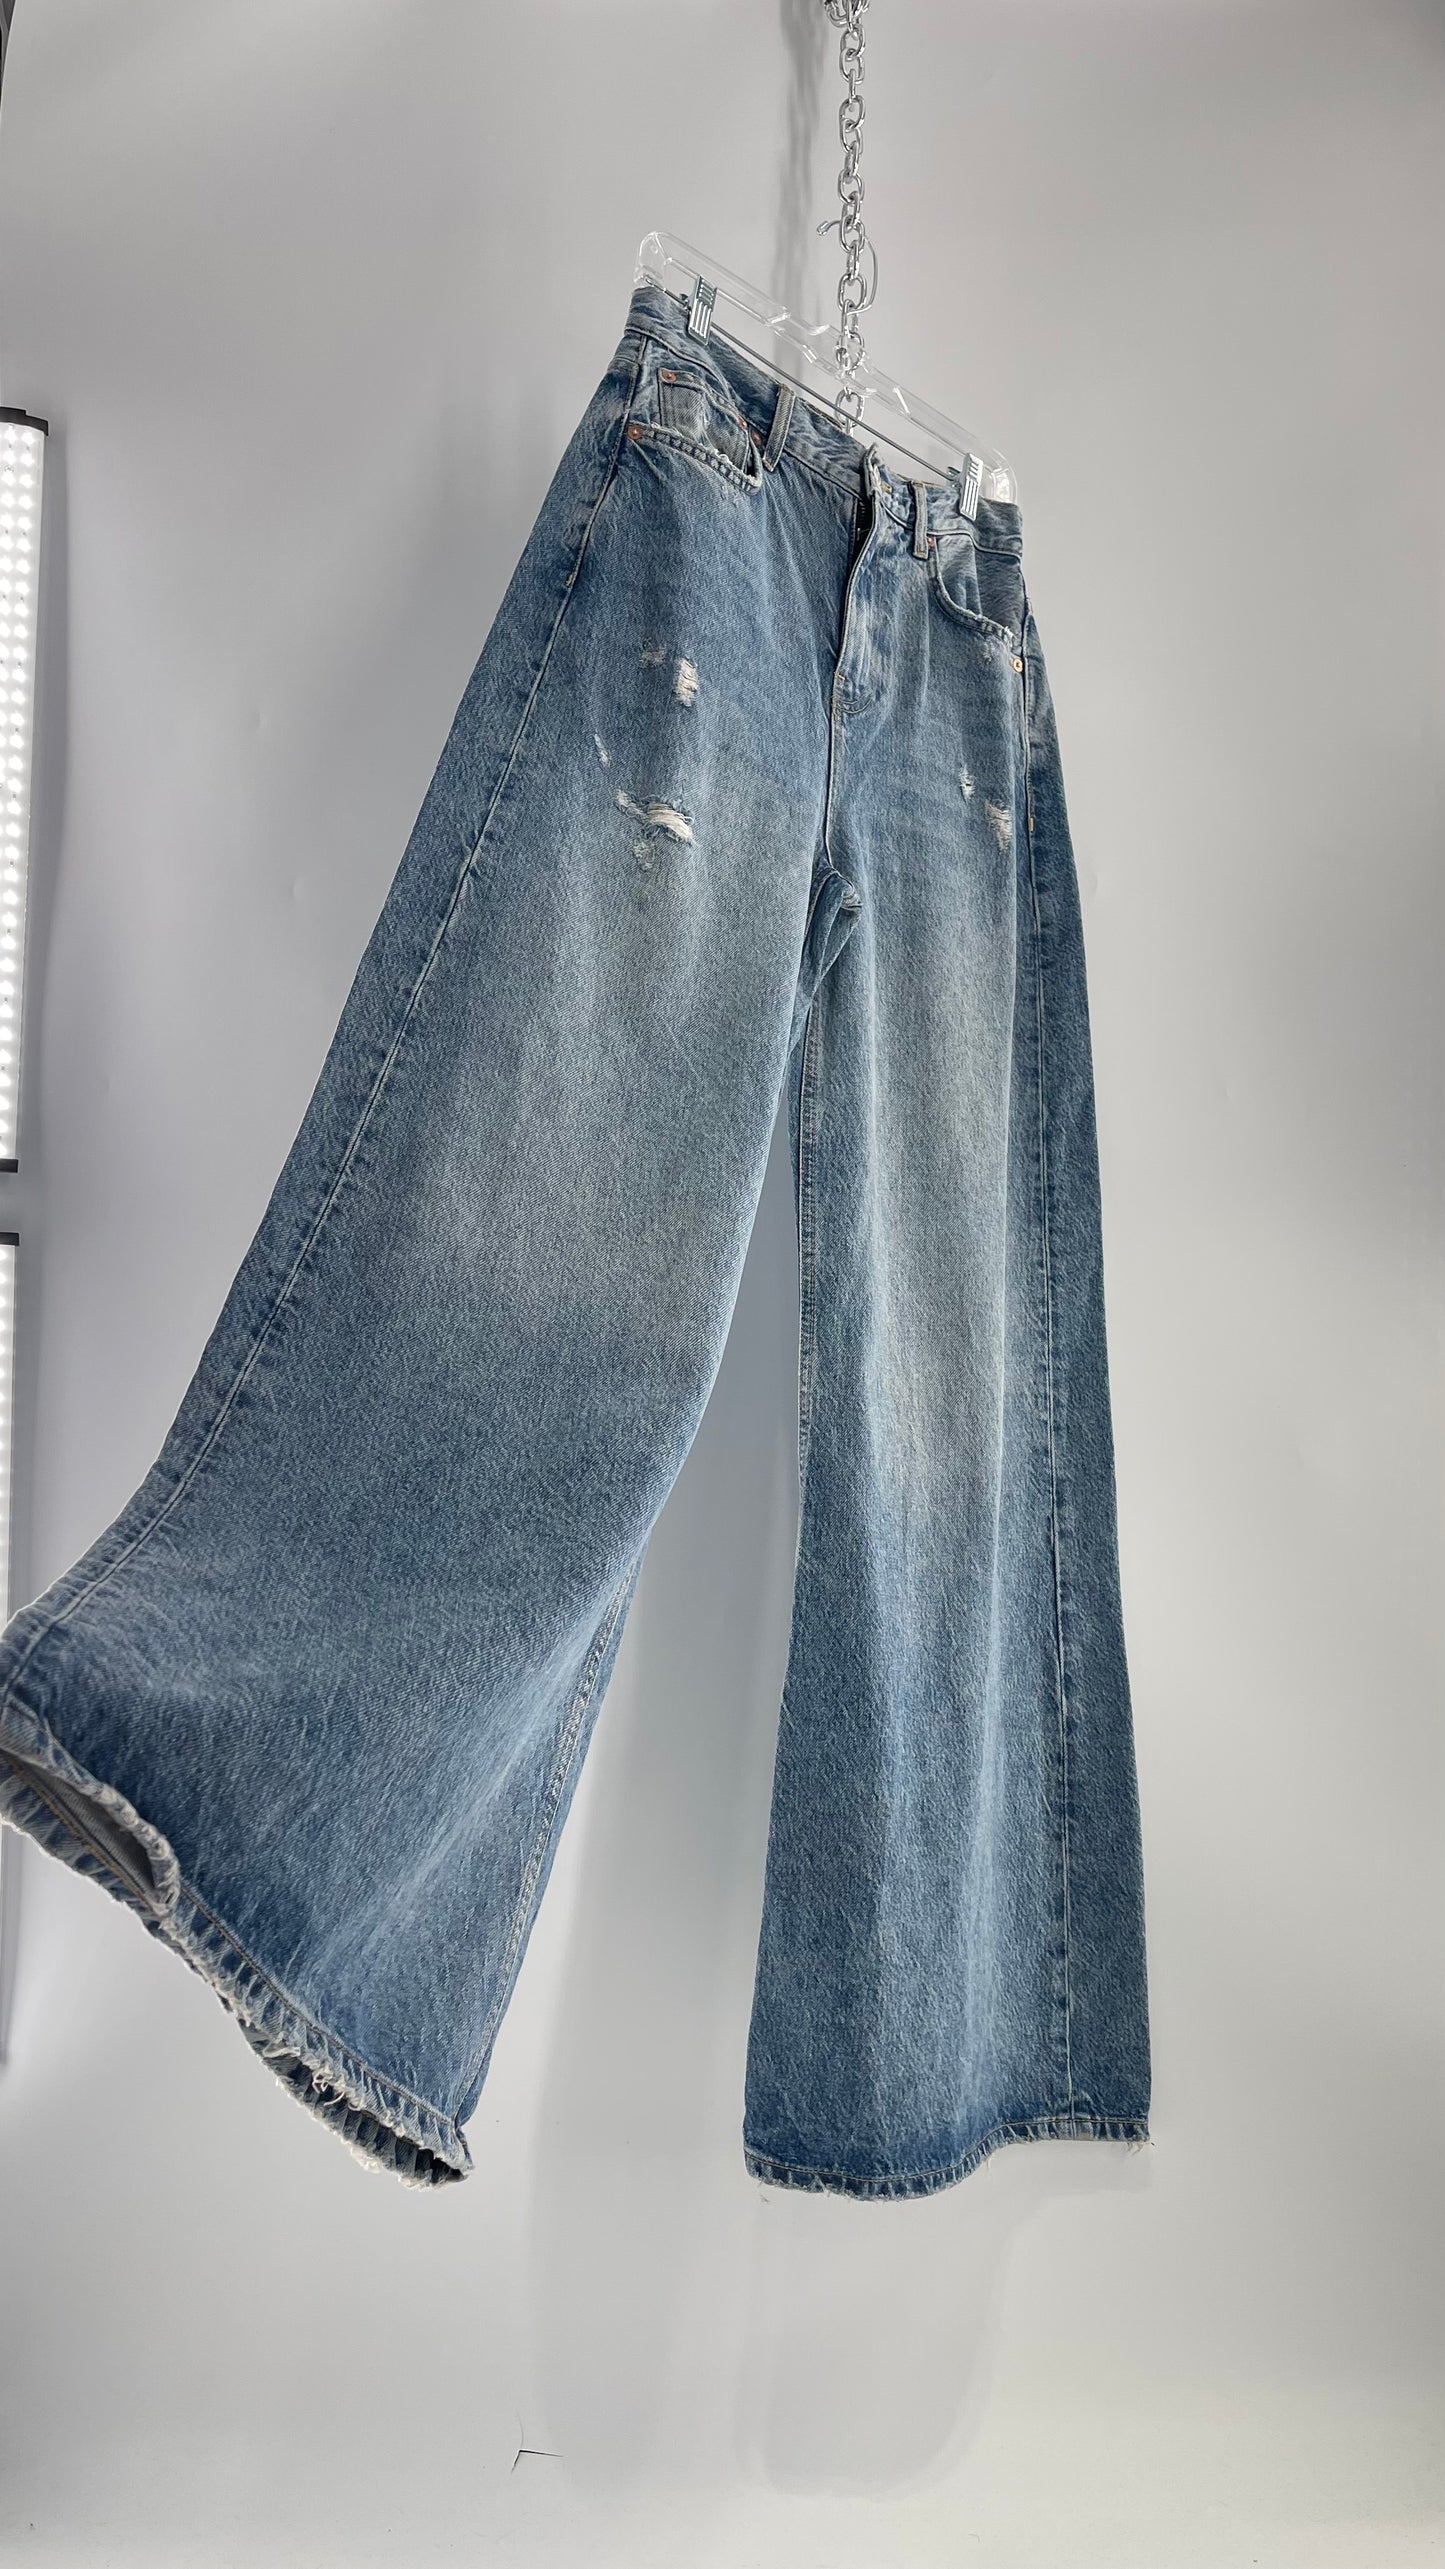 Free People Medium Wash Wide Leg Jeans with Some Distressing and Tags Attached (29)